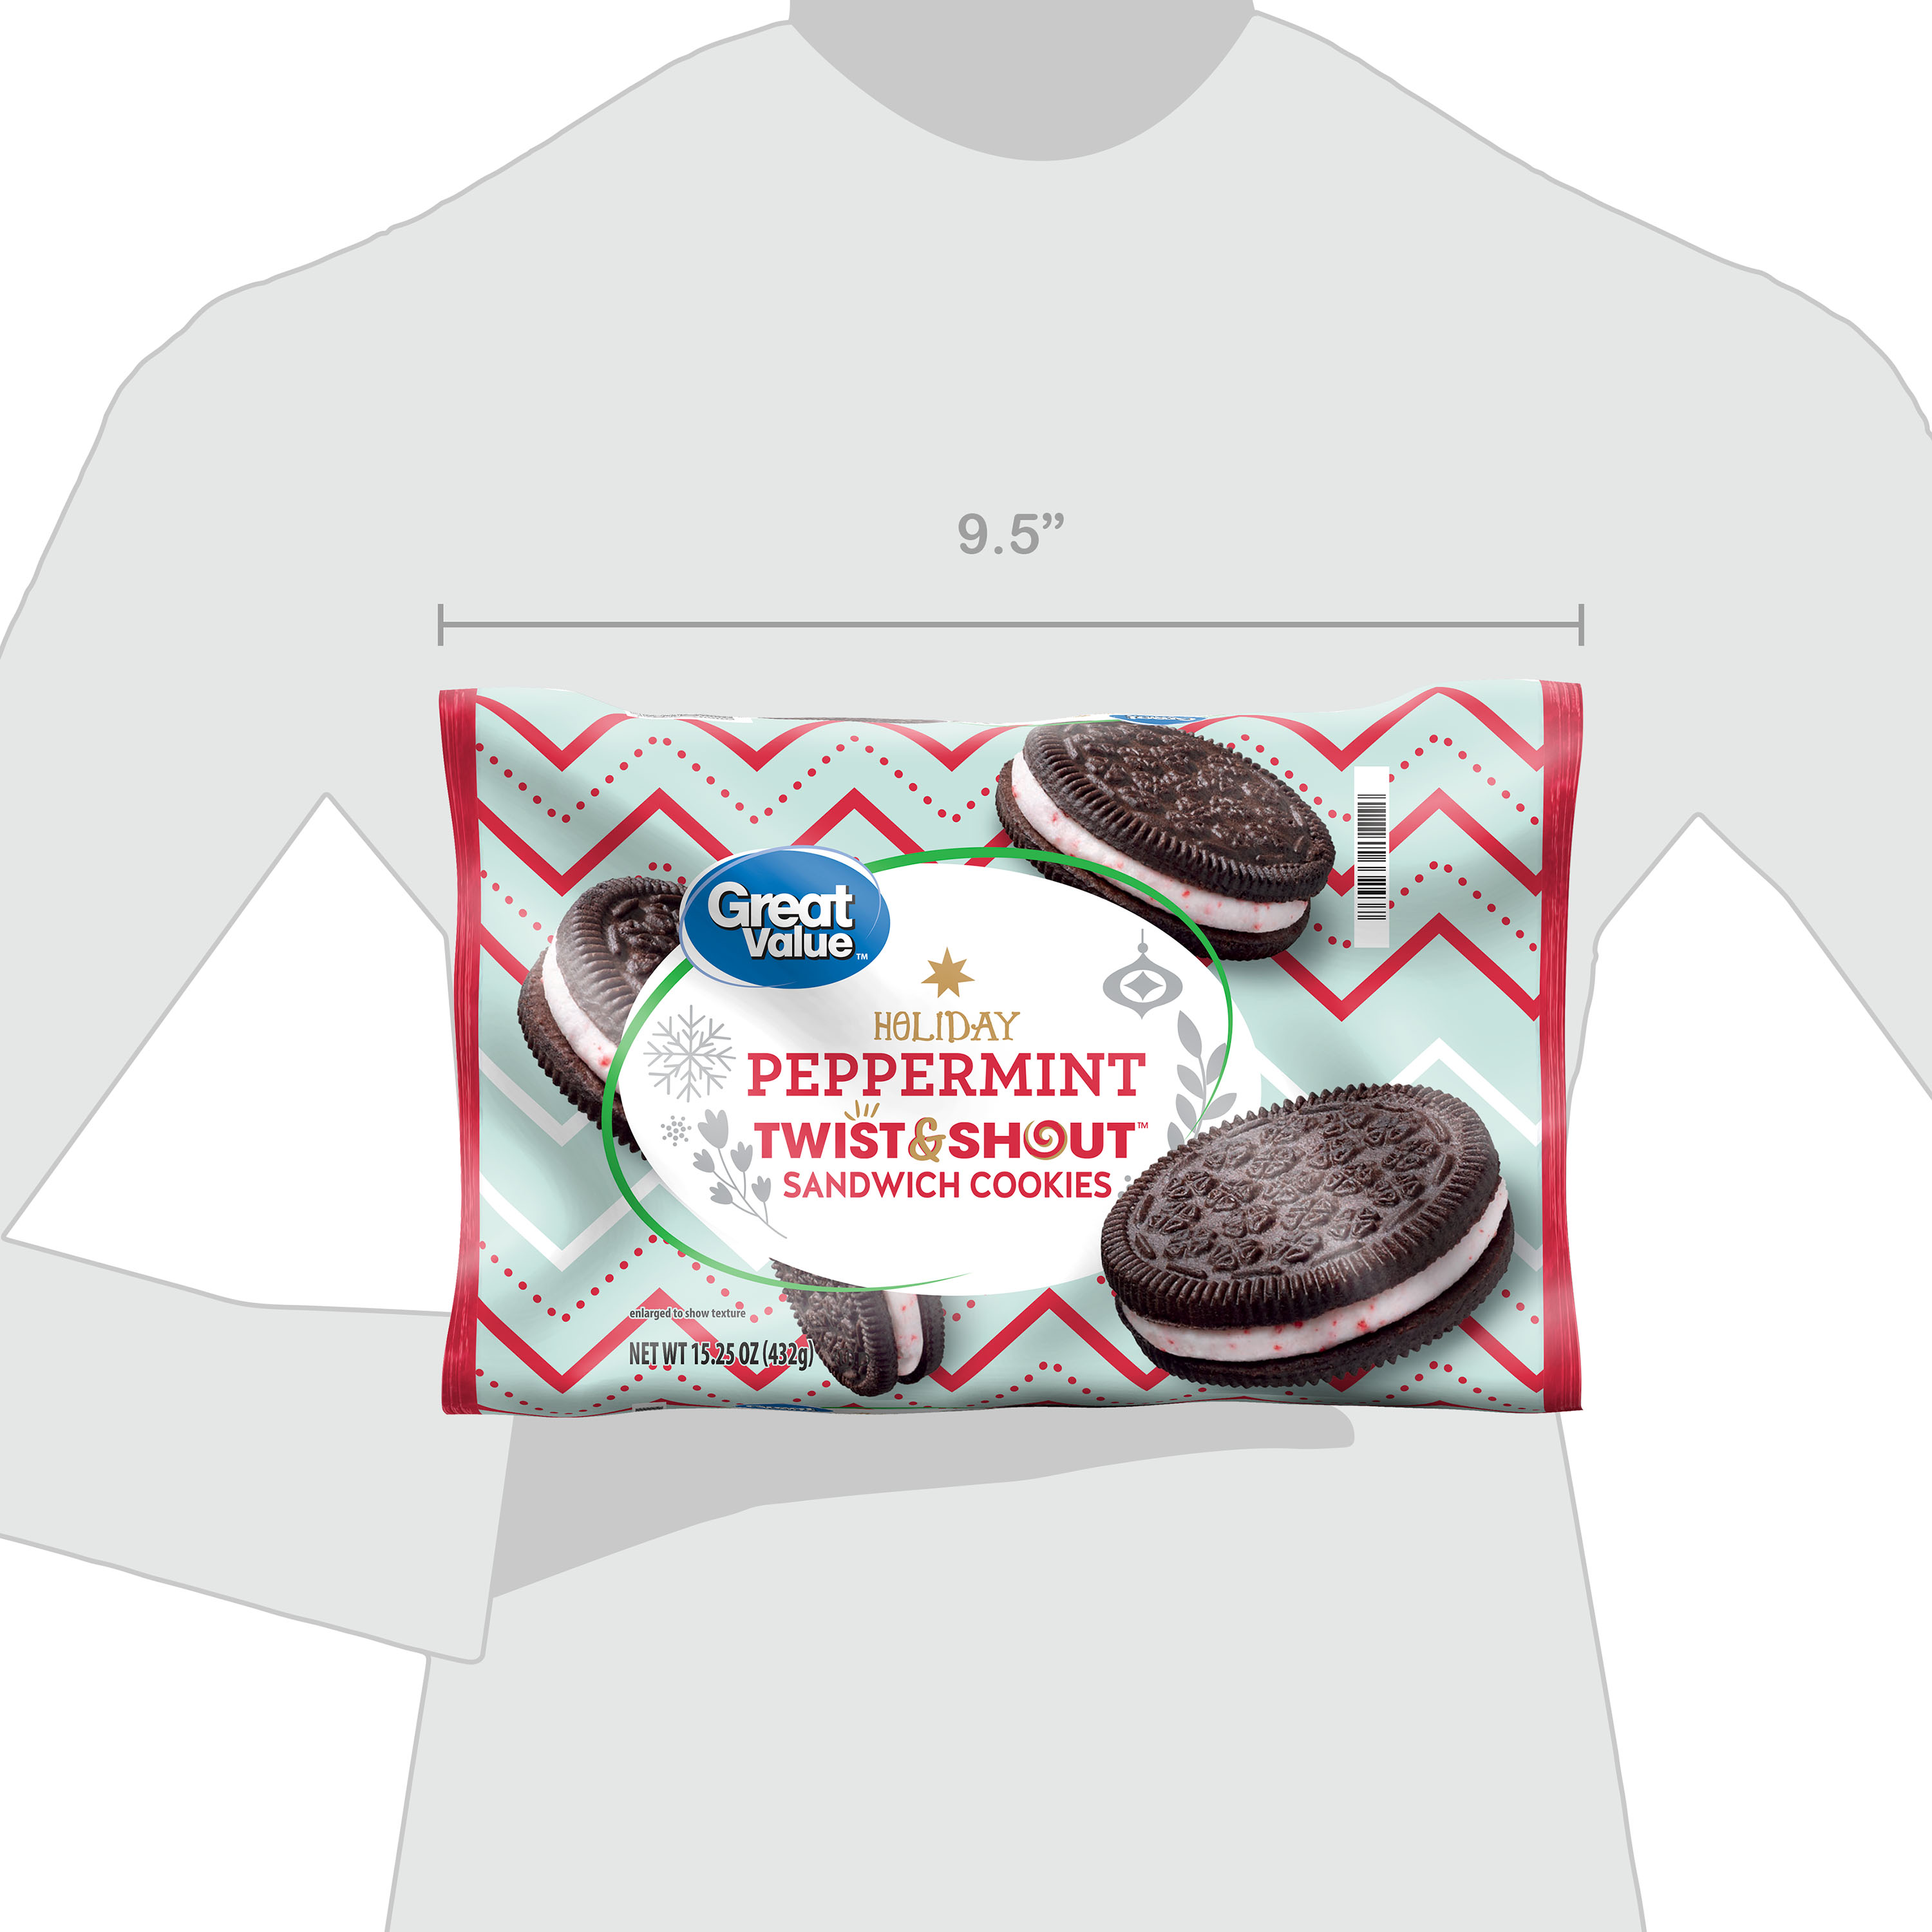 Great Value Holiday Peppermint Twist & Shout Sandwich Cookies 15.25 oz - image 5 of 6